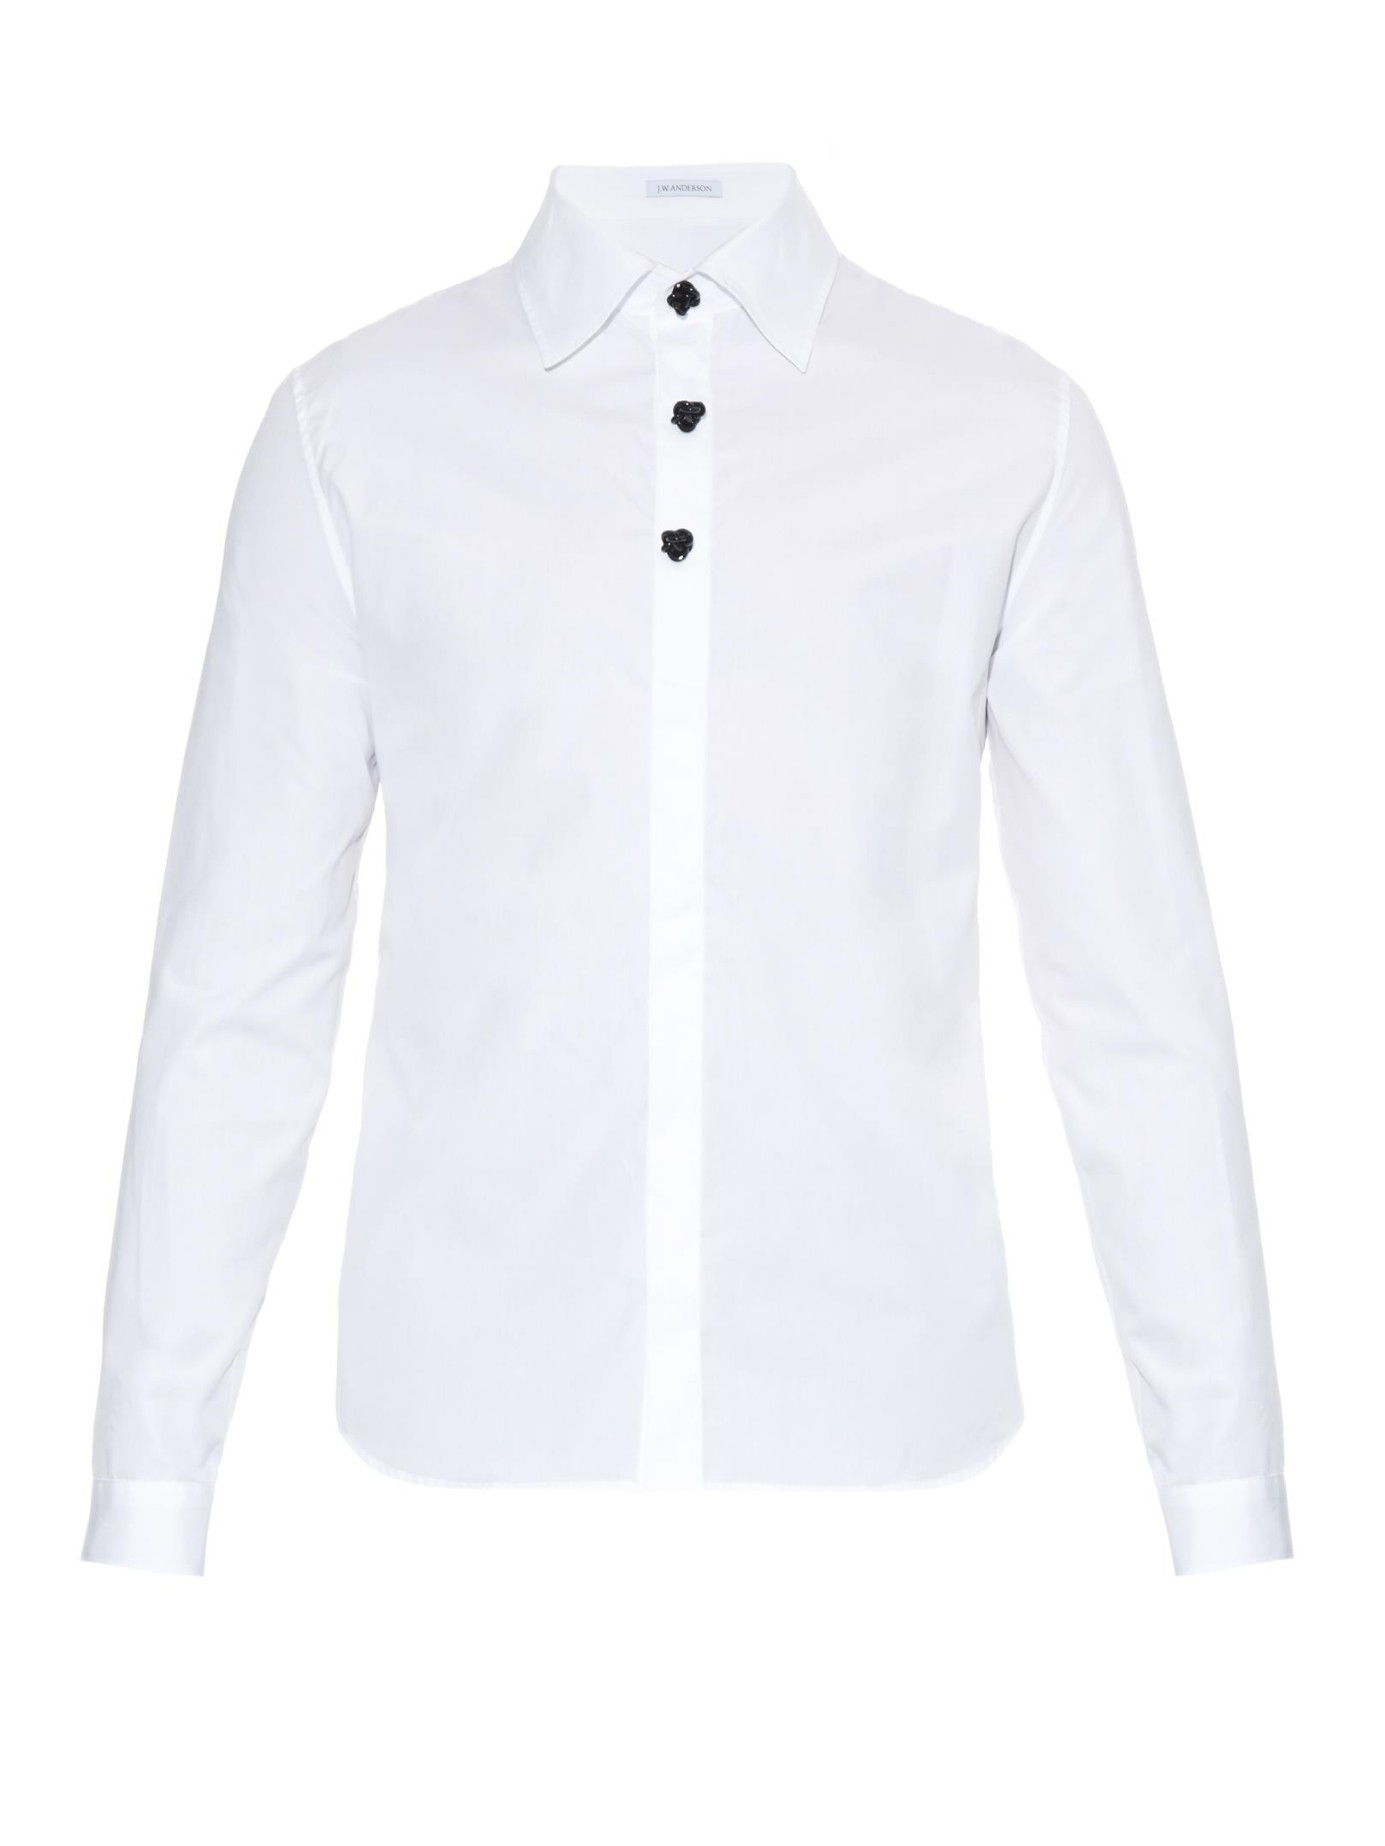 JW Anderson Cambridge Collar Knot-button Cotton Shirt in White for Men ...